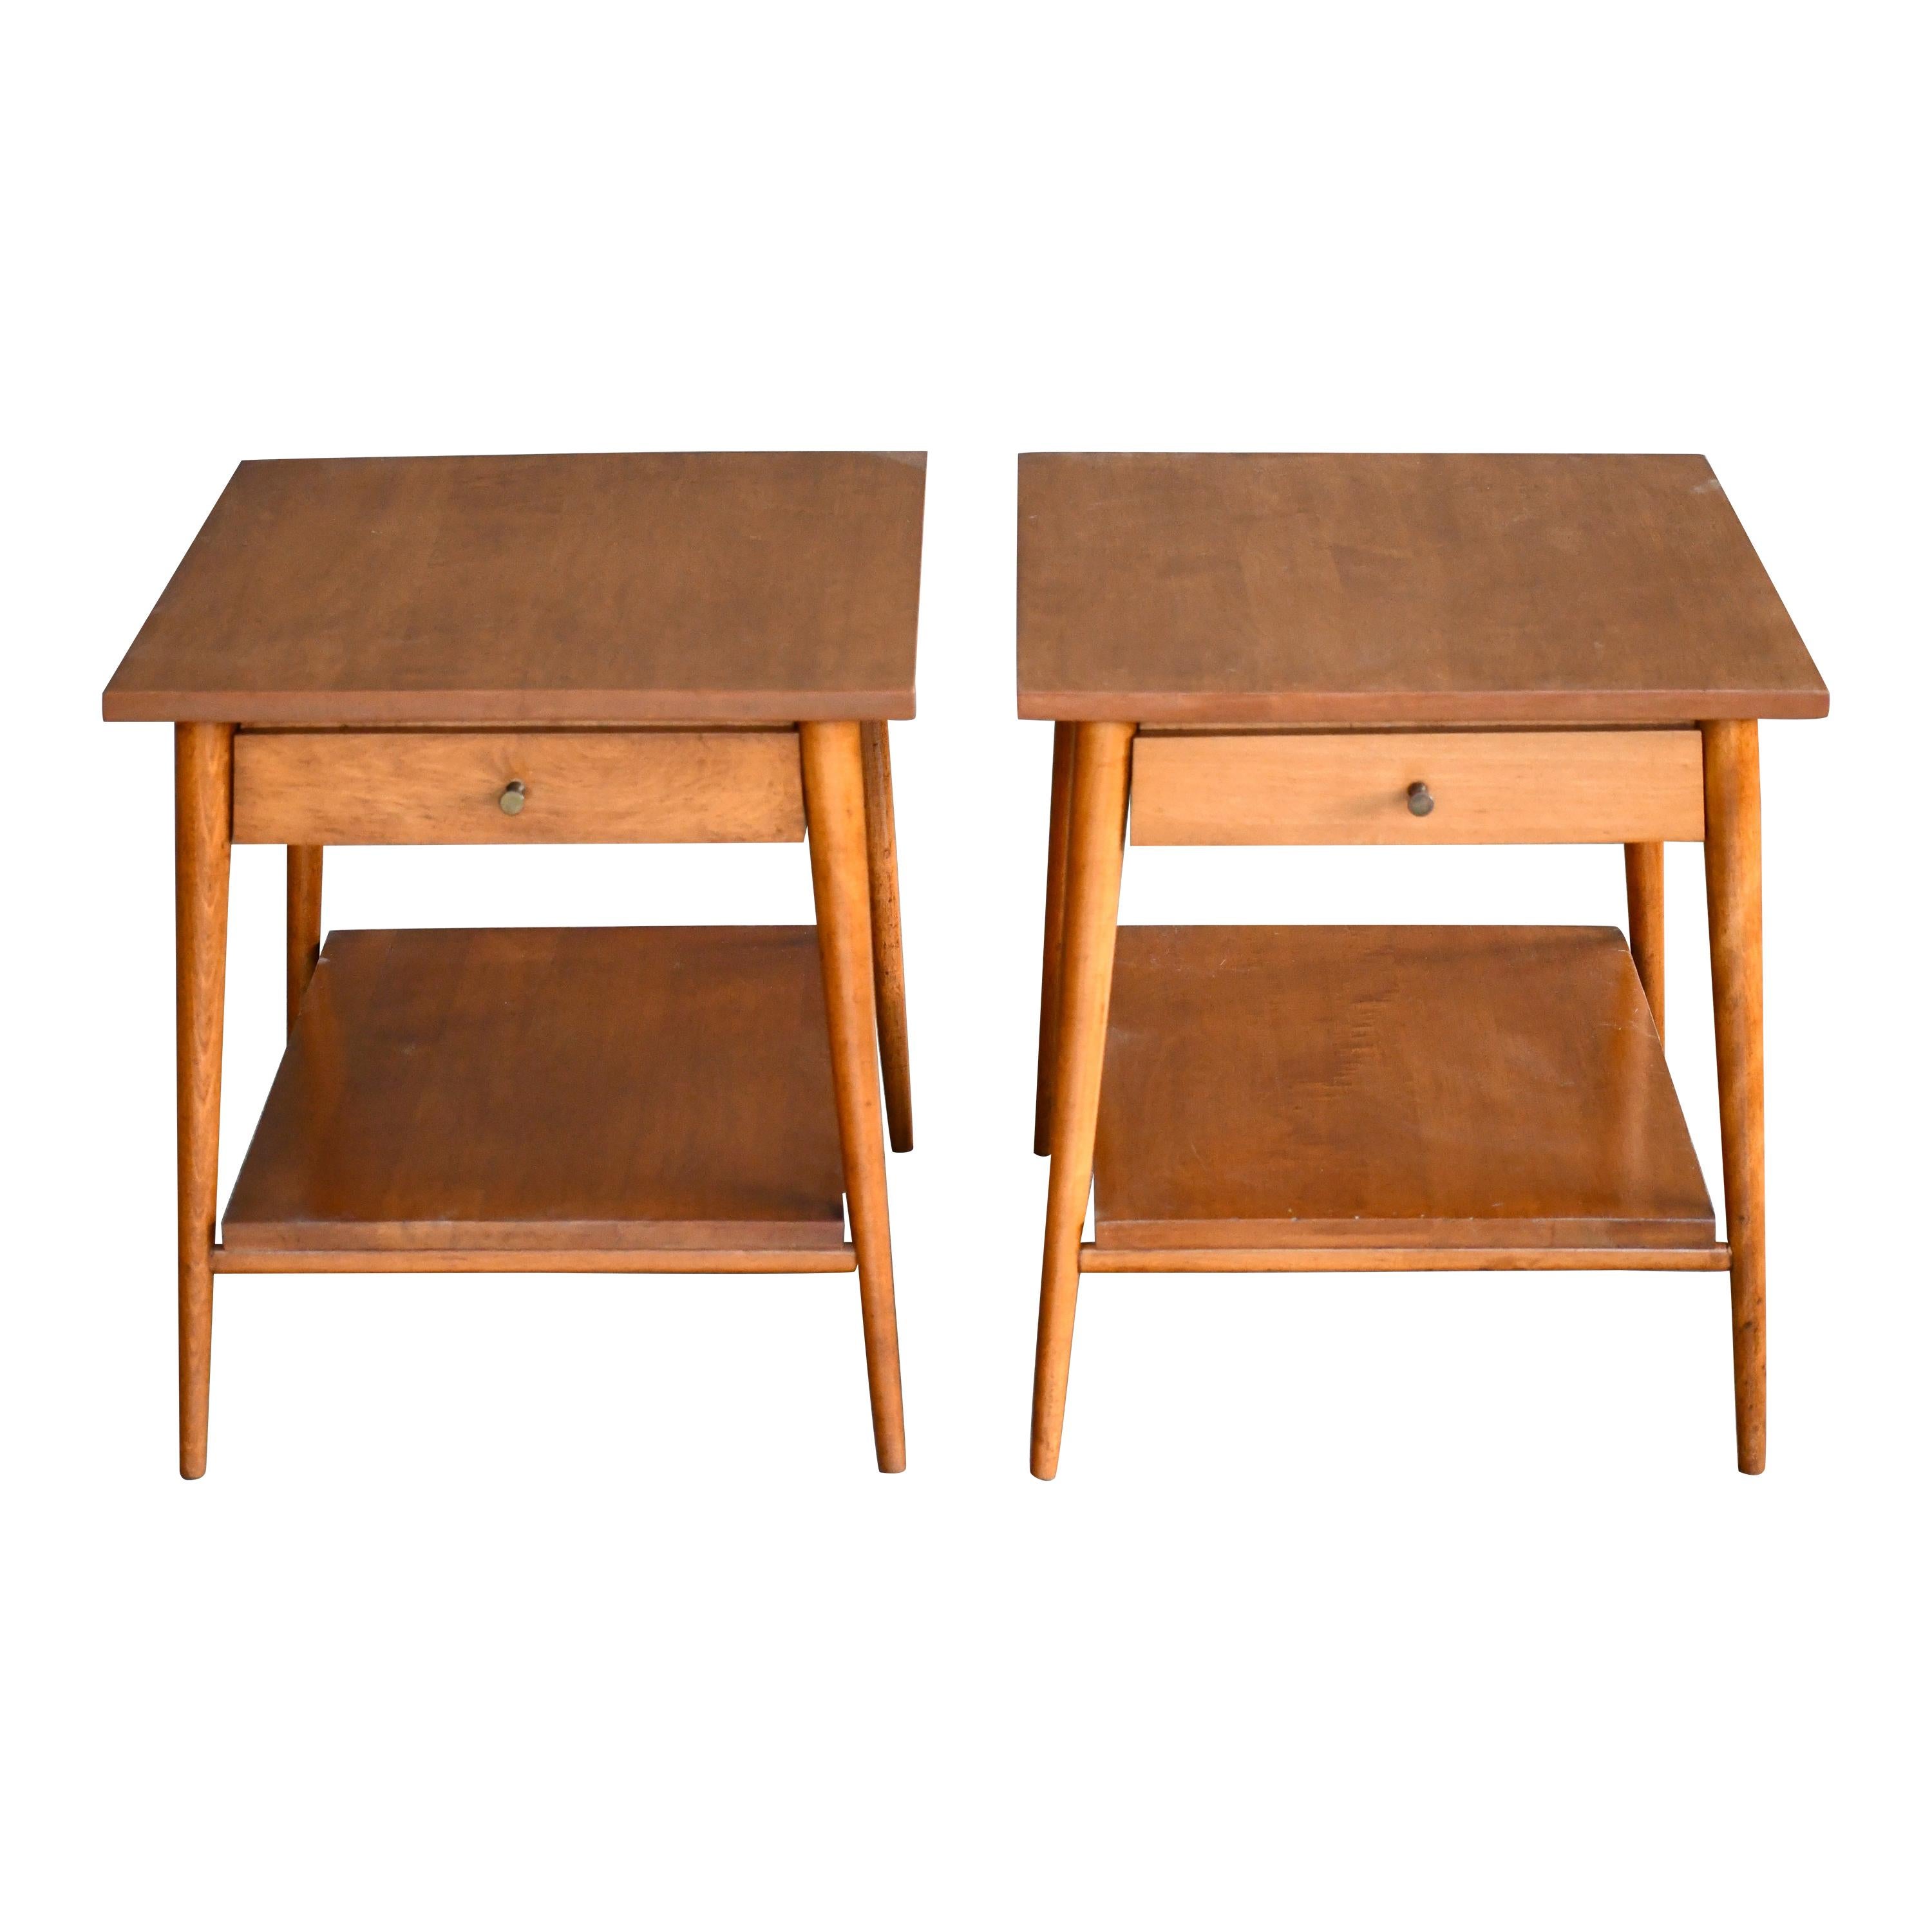 Pair of Paul McCobb "Planner Group" Nightstands or End Tables 1950's